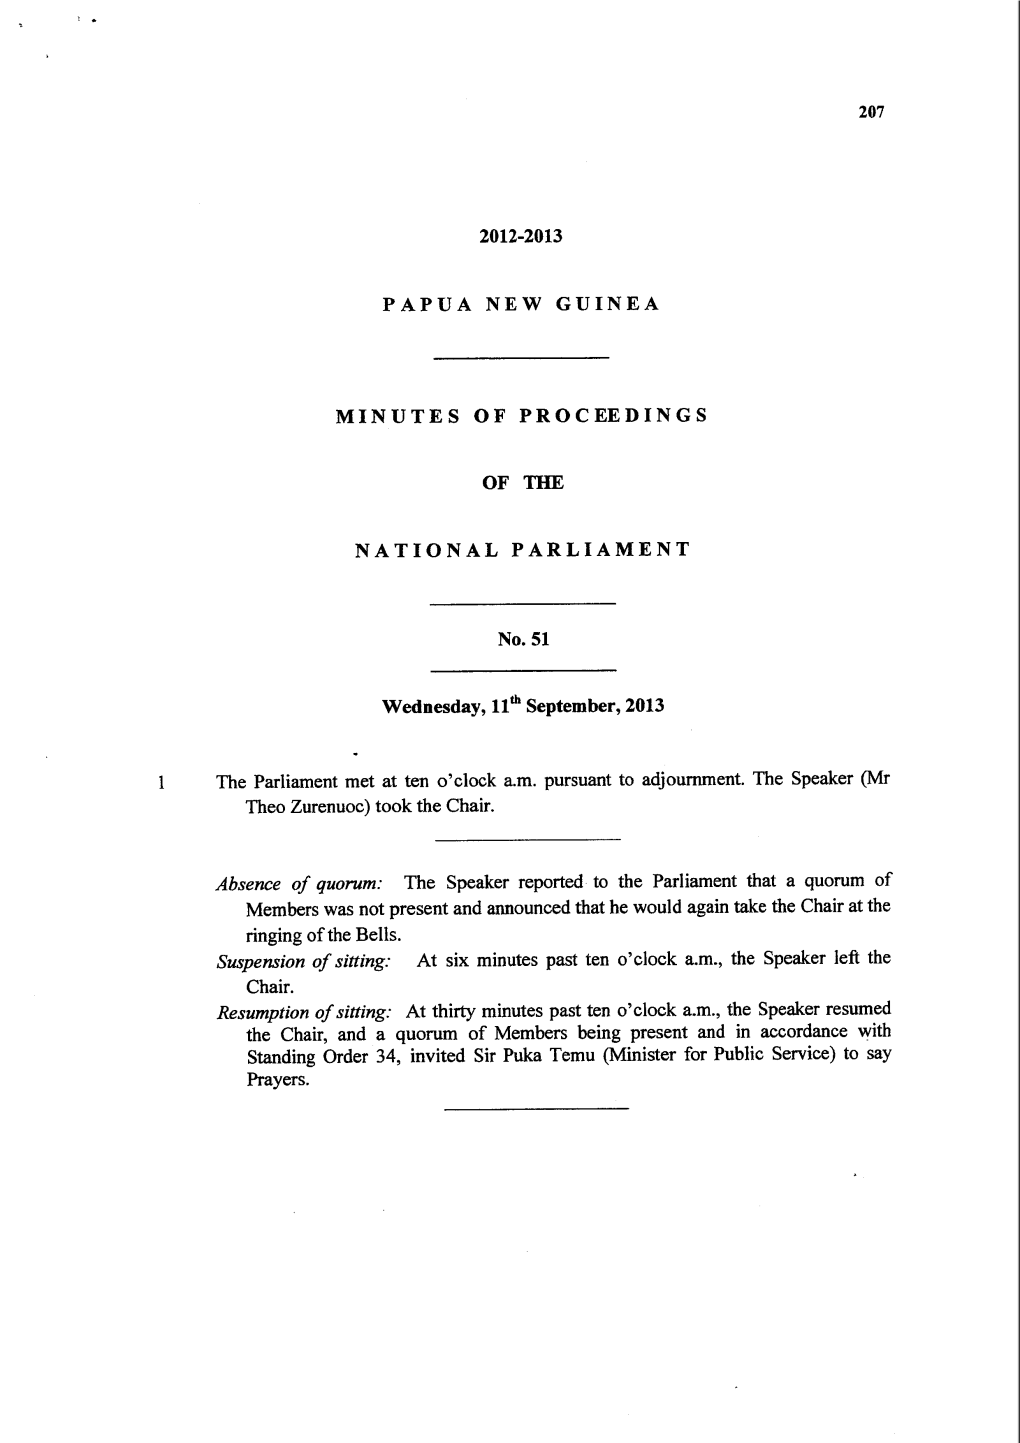 2012-2013 Papua New Guinea Minutes of Proceedings Of